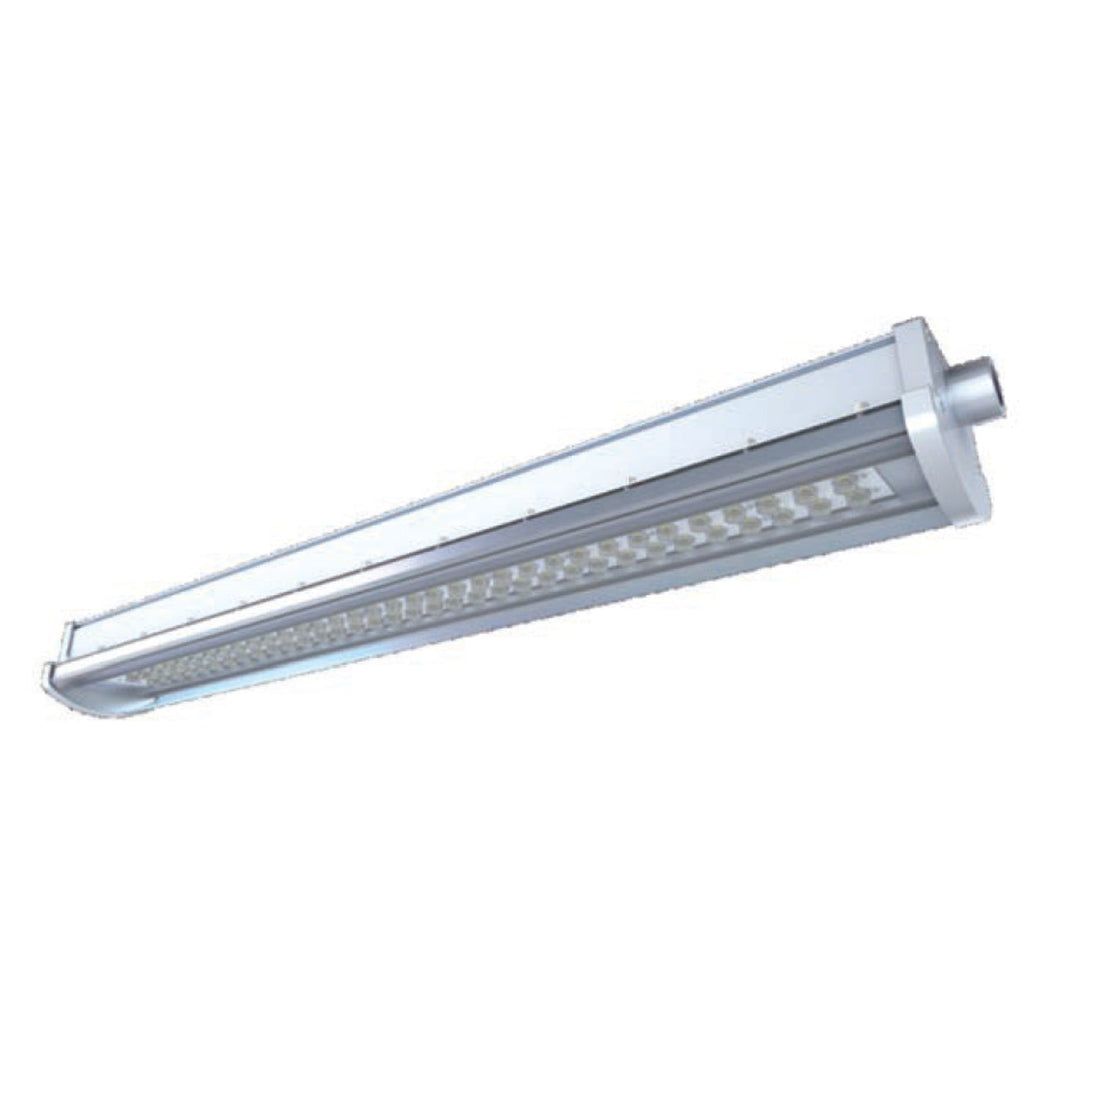 4FT LED Explosion Proof Low Bay Linear Light - 60W - 5000K Daylight, 8400LM, 0-10V Dimming, IP66 Rated, Hazardous Location Lighting Fixtures